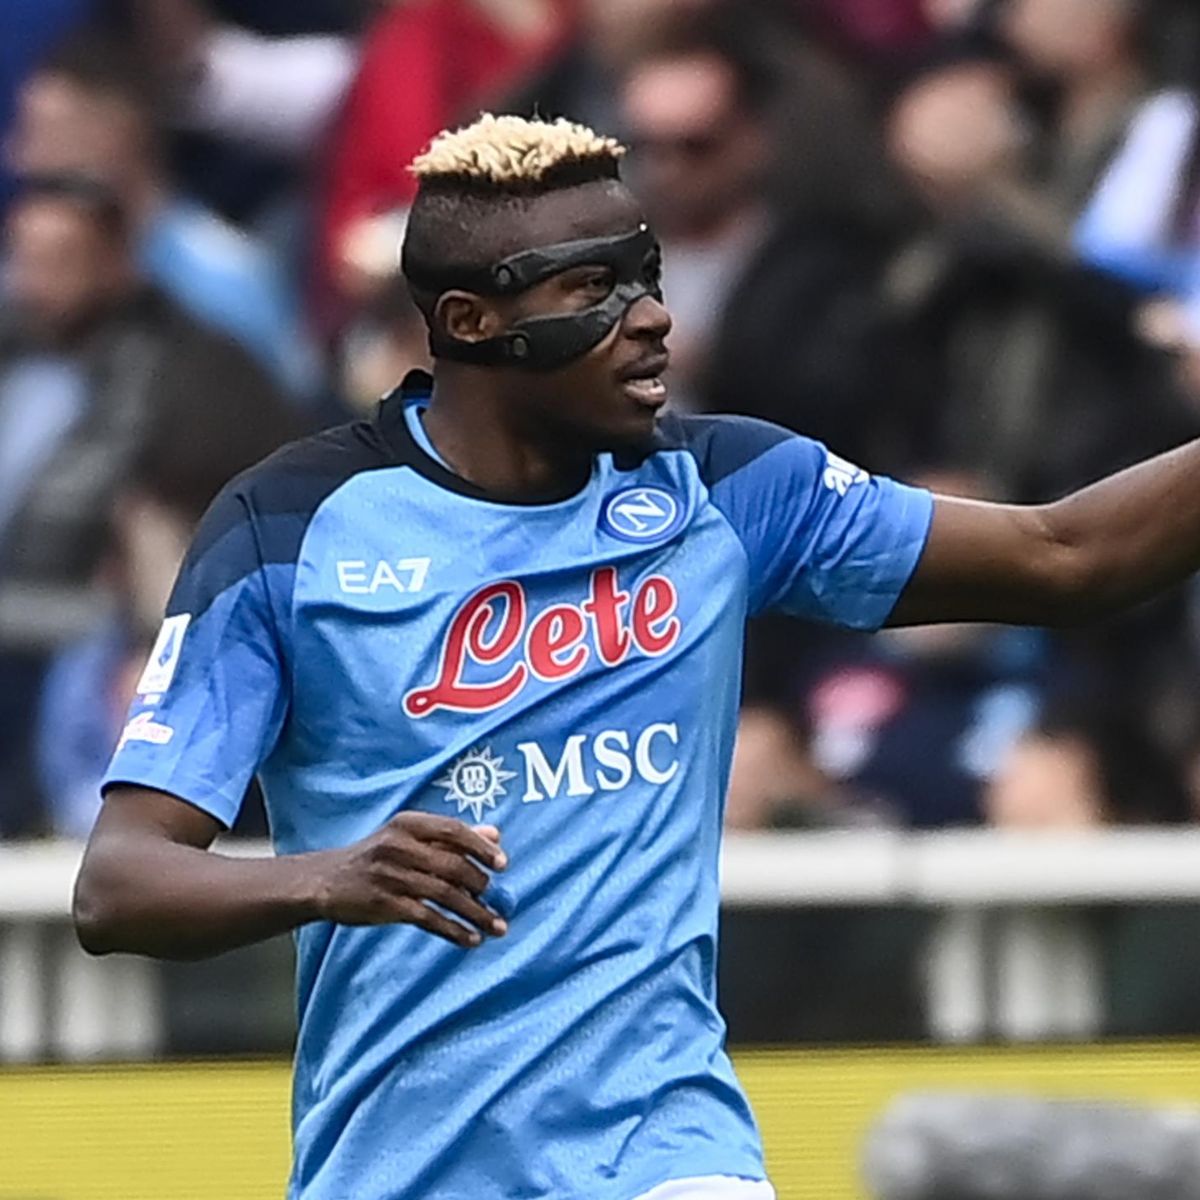 Torino 0-4 Napoli: Victor Osimhen fires Serie A leaders to victory in Turin